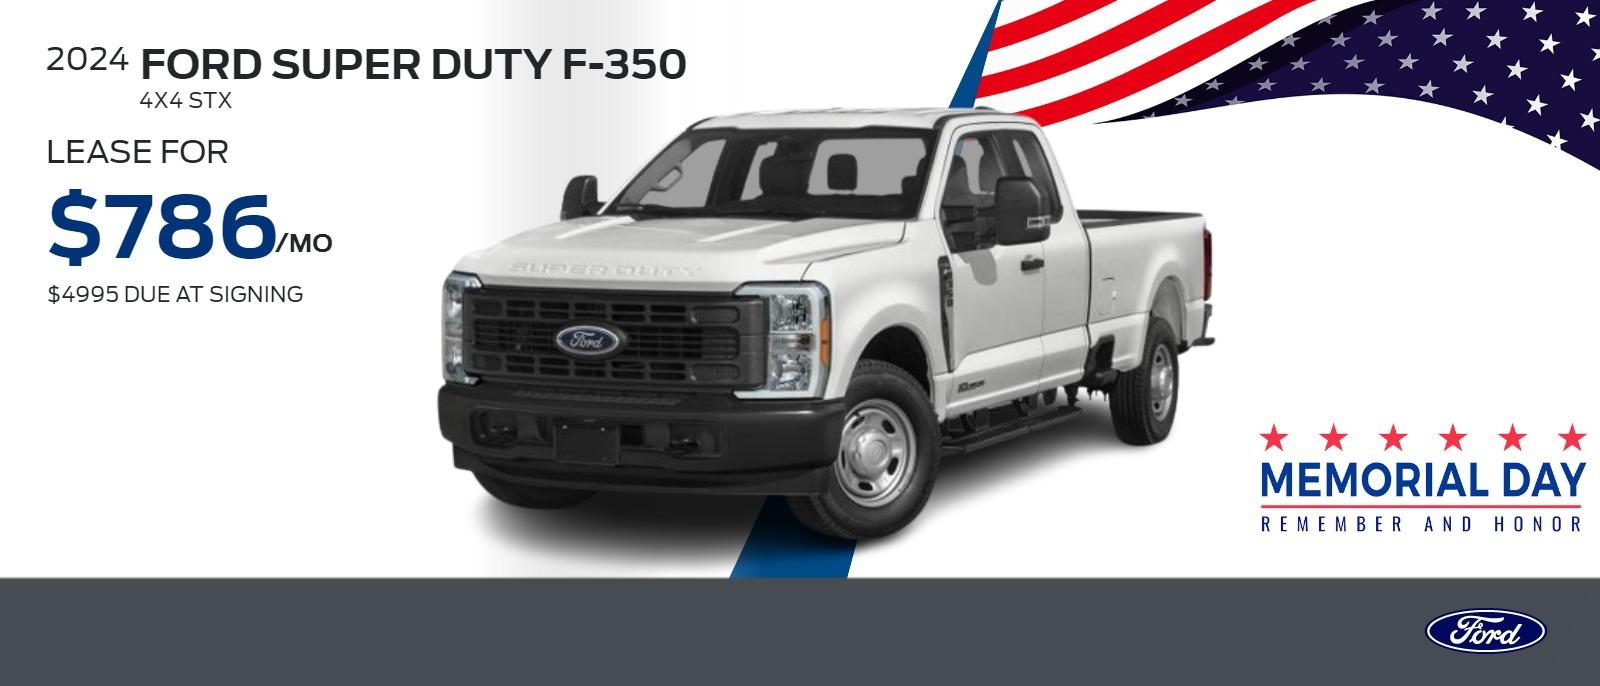 2024 Ford F350 4x4 STX
$786 per month lease $4995 due at signing